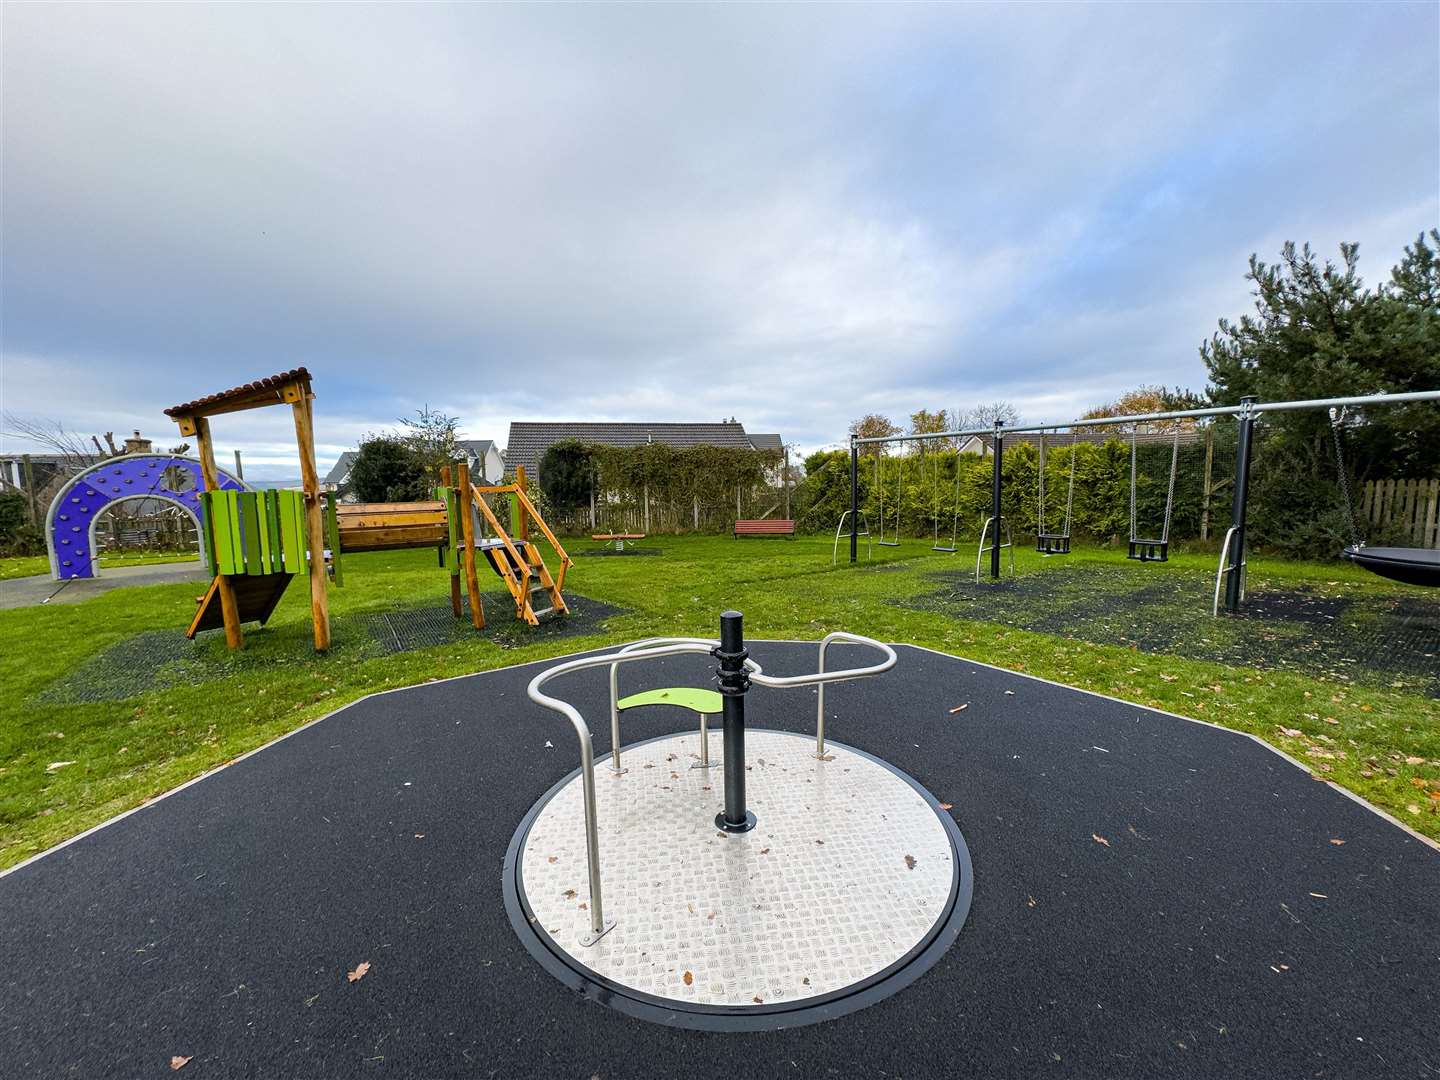 Croy playpark has plenty of new attractions for children